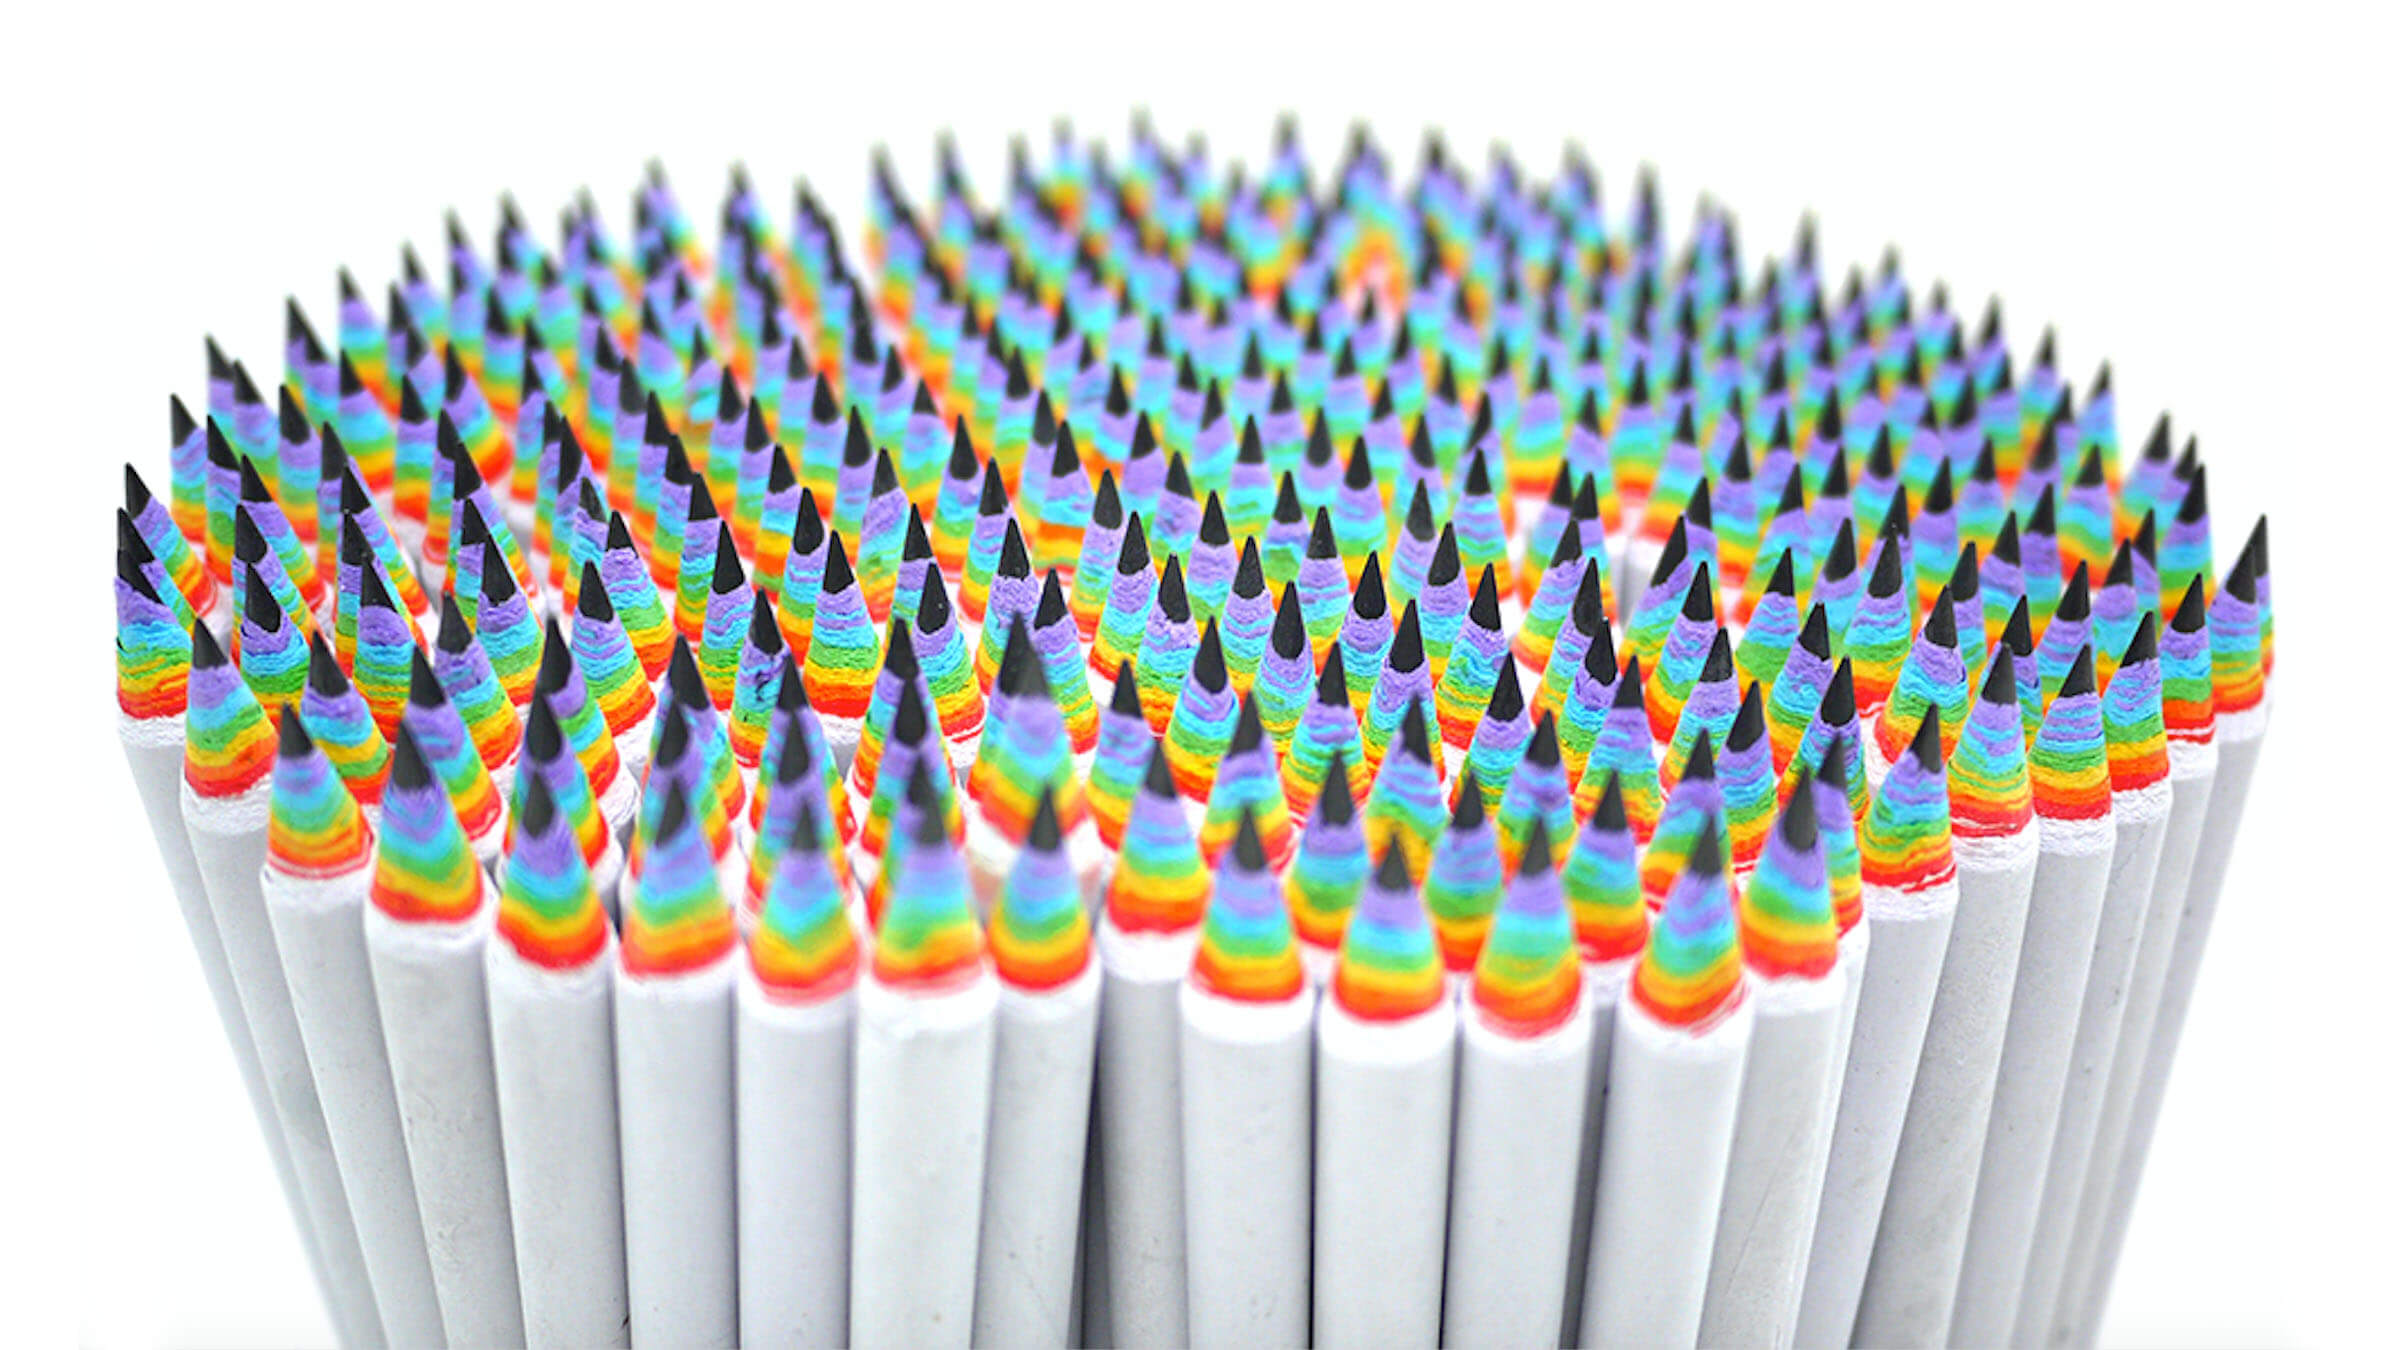 Our Tests Prove These Are The Best Pencils in the World